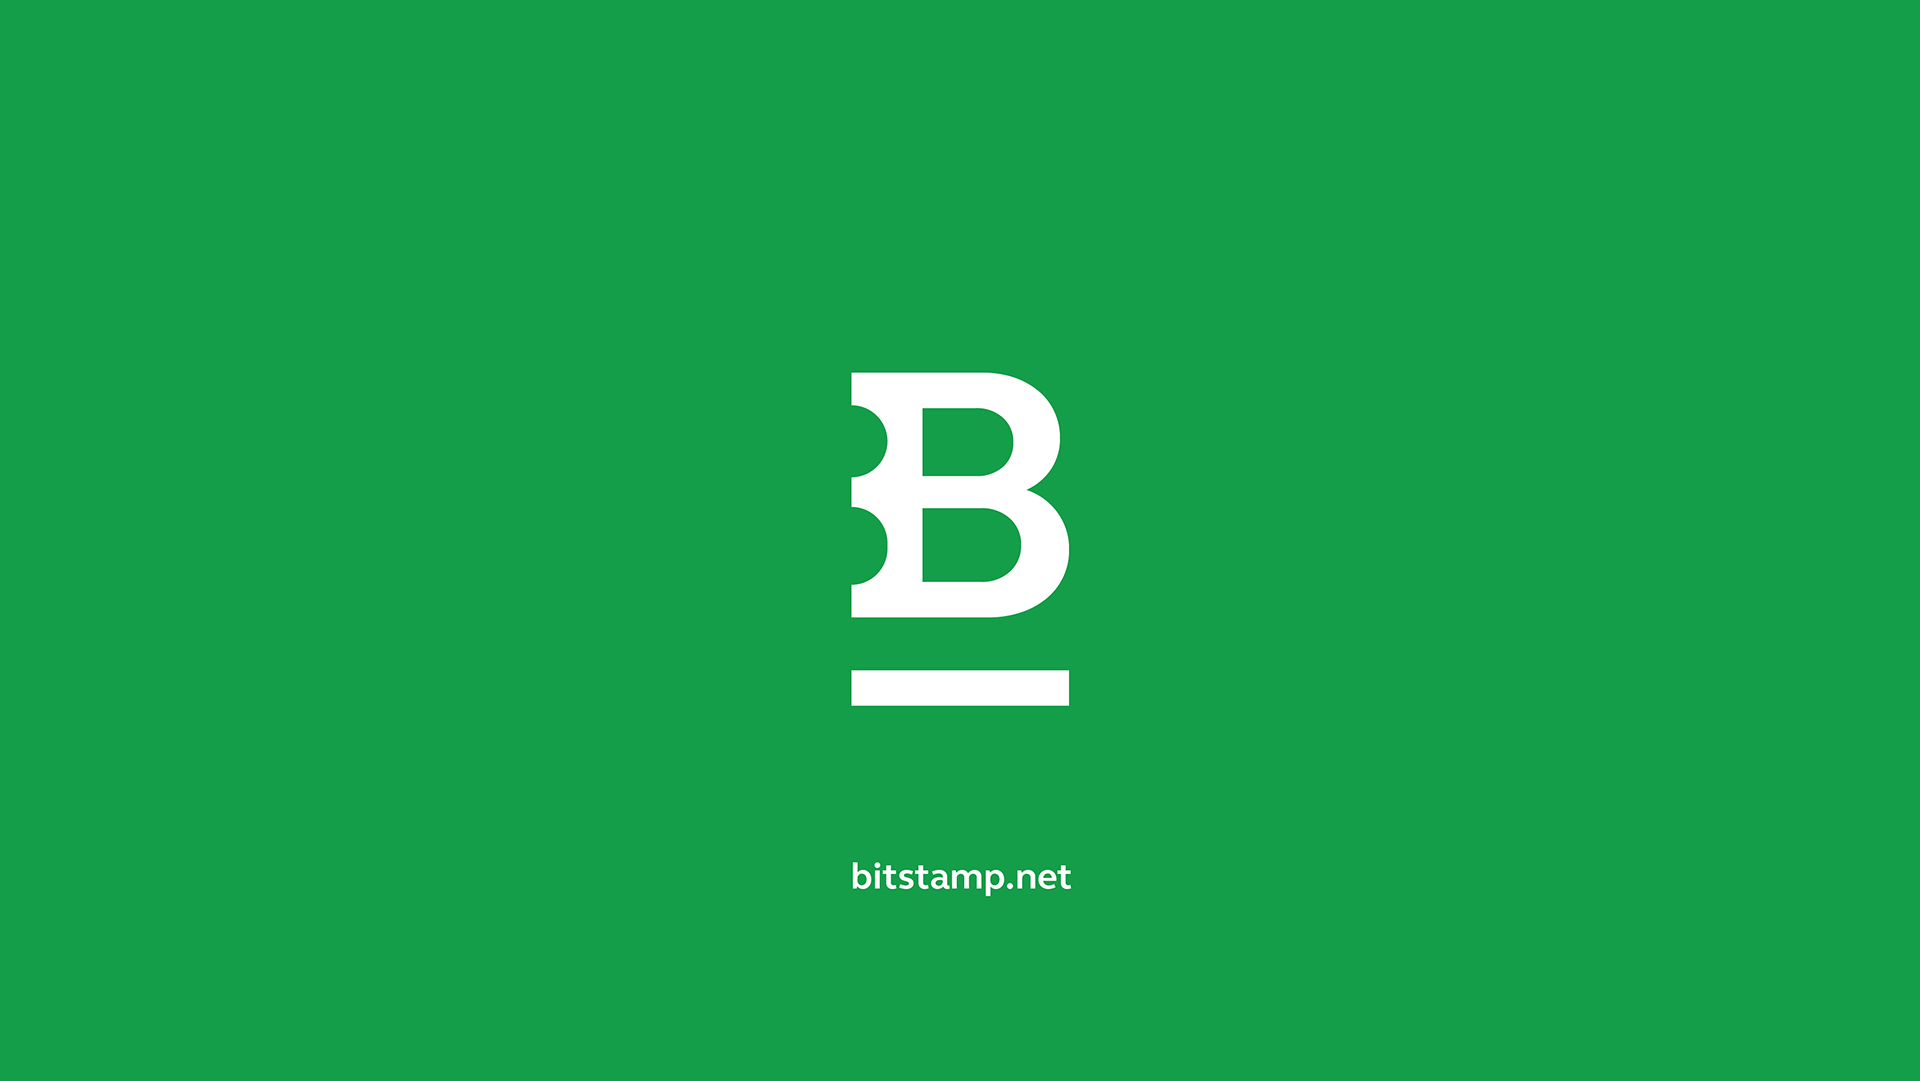 Bitstamp net what is an undervalued crypto coin